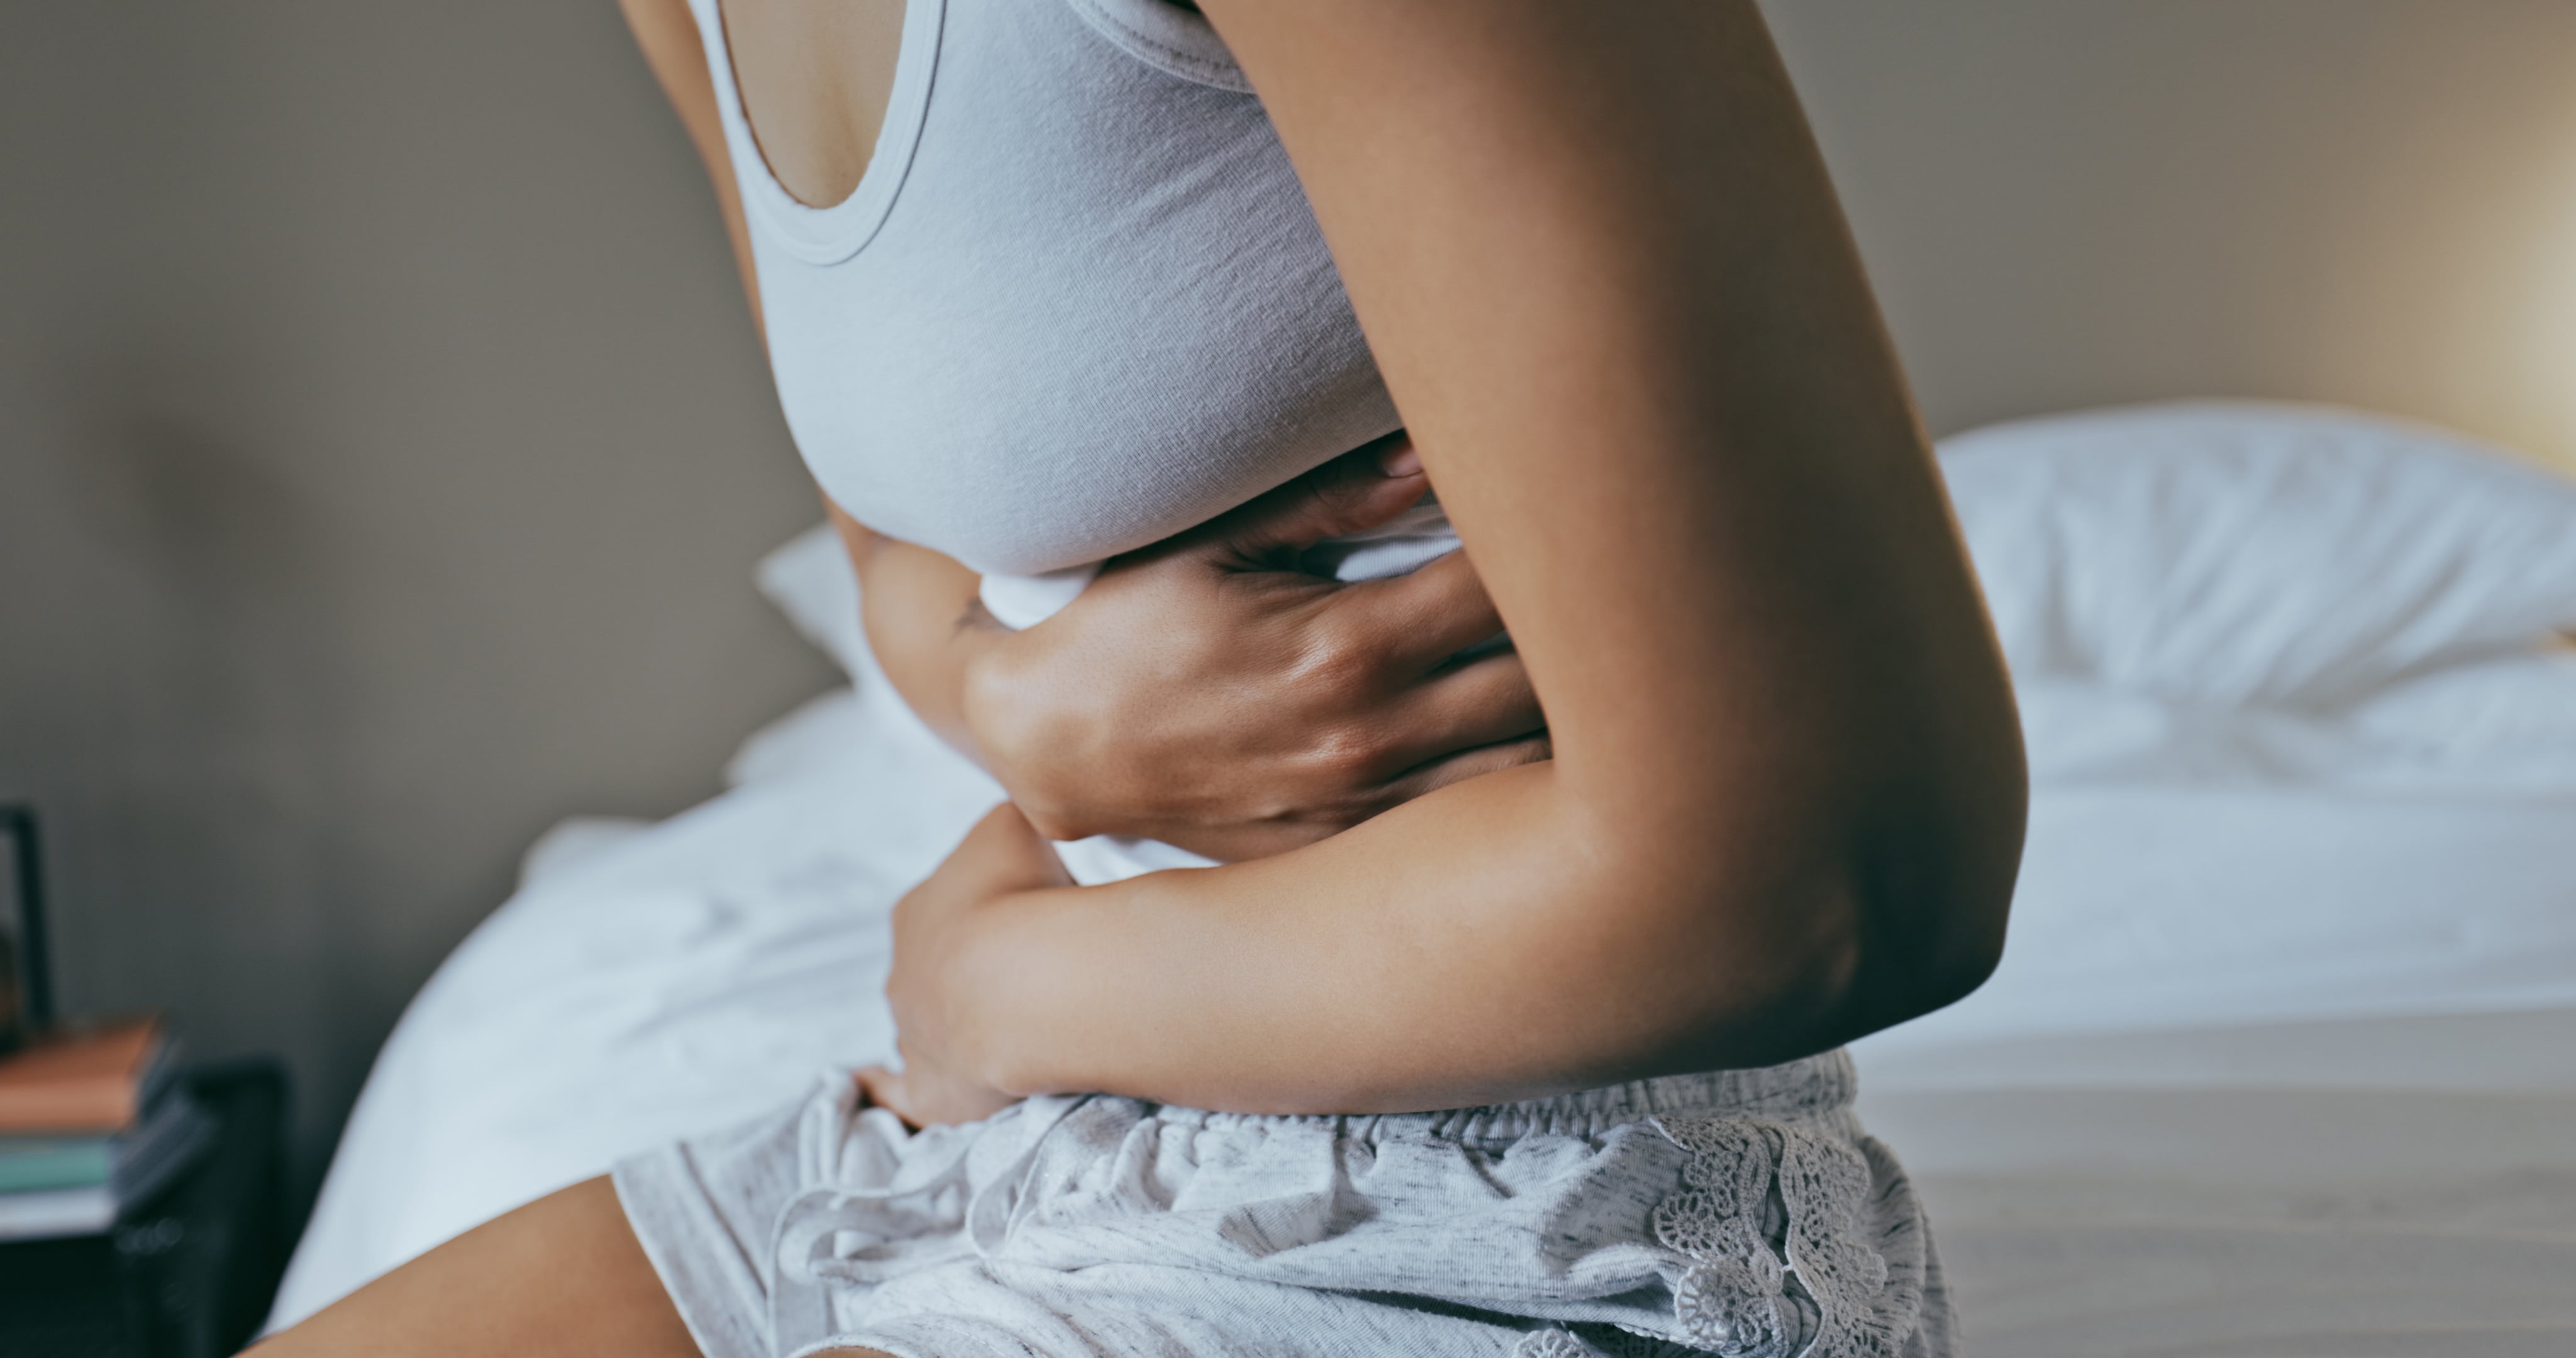 8 reasons you're bloated (and what to do about it)